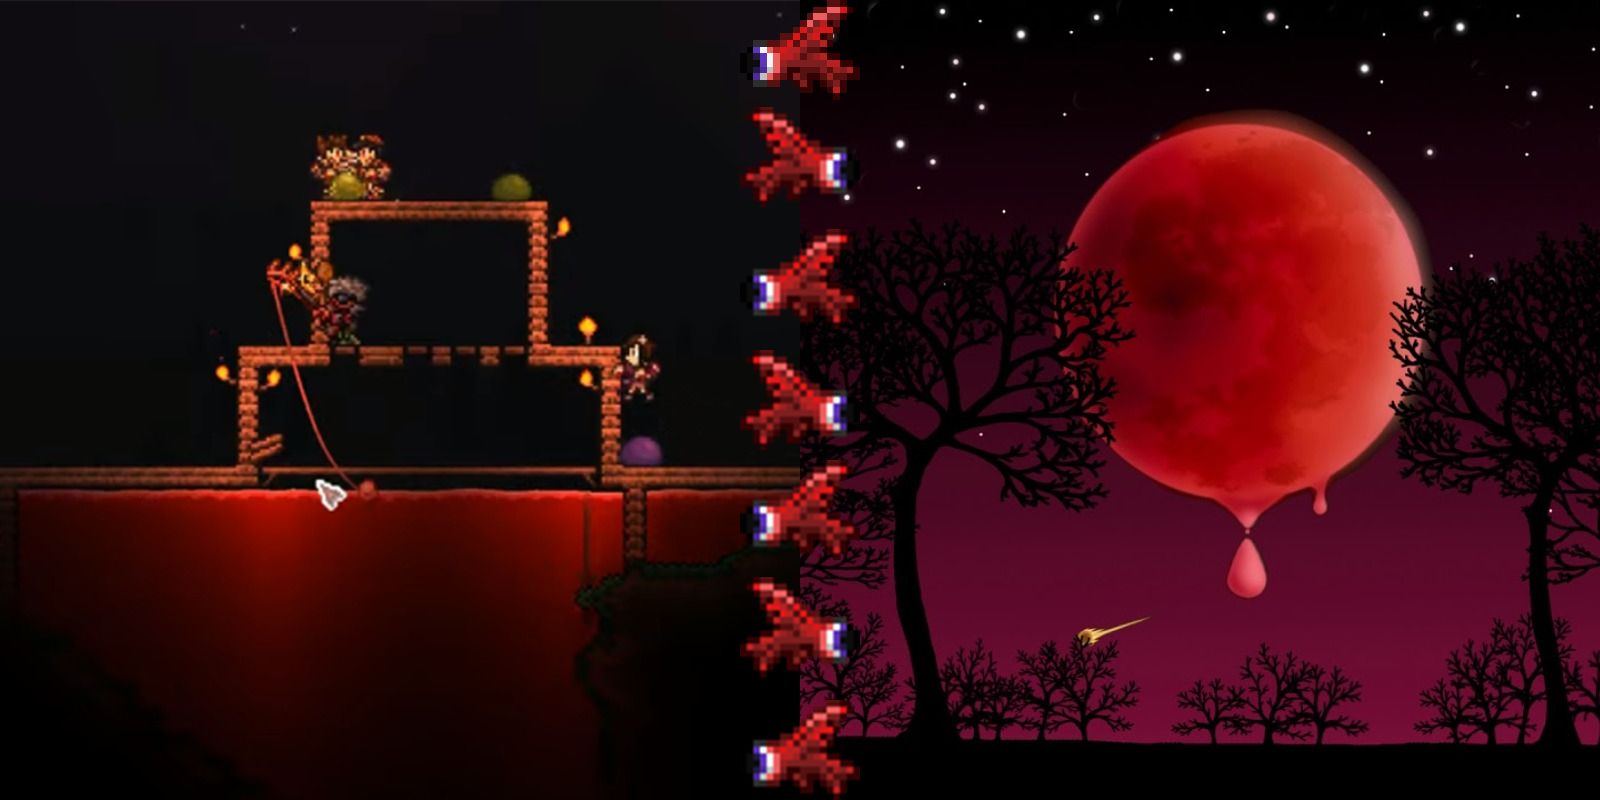 feature image terraria beat wandering eye fish guide player fishing during a blood moon and images of wandering eye fish